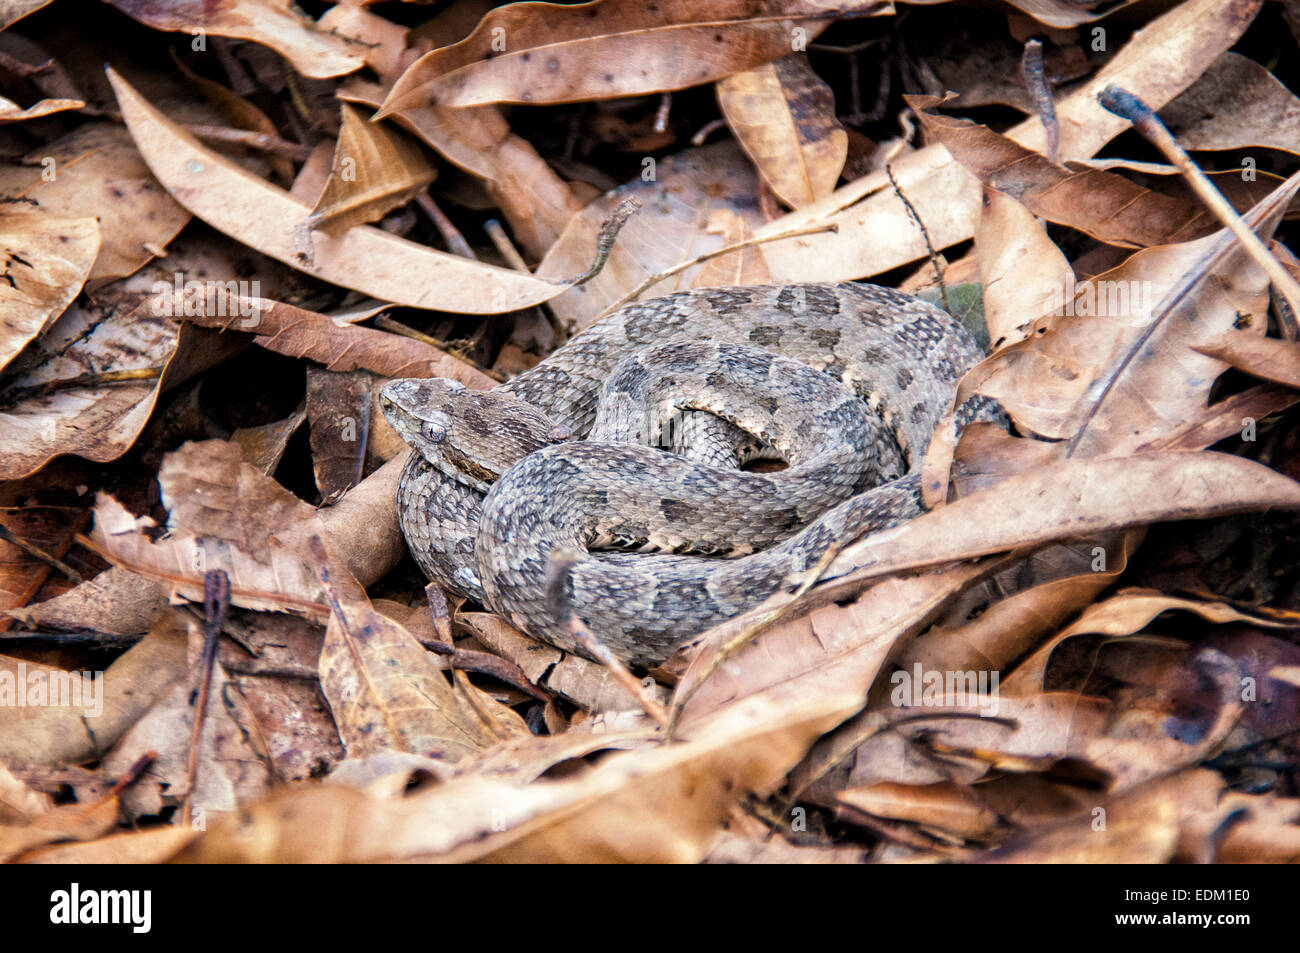 Mato Grosso Lancehead Viper, Bothrops mattogrossensis, coiled on a bed of leaves, Pantanal (Taken under controlled conditions) Stock Photo